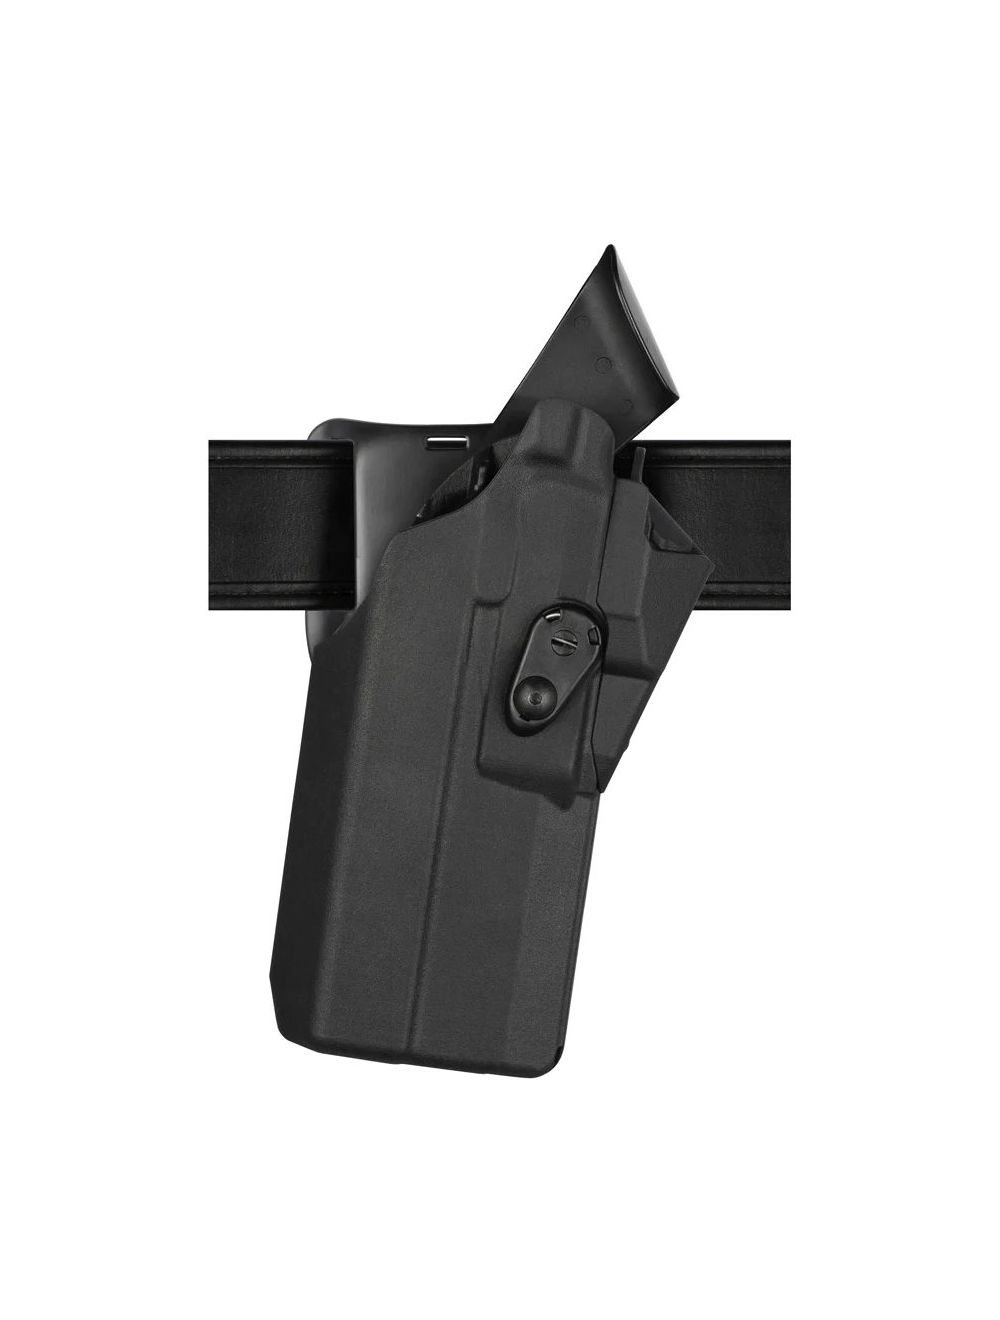 Model 7390RDS 7TS ALS Mid Ride Duty Holster for Glock 19 MOS w/ Light